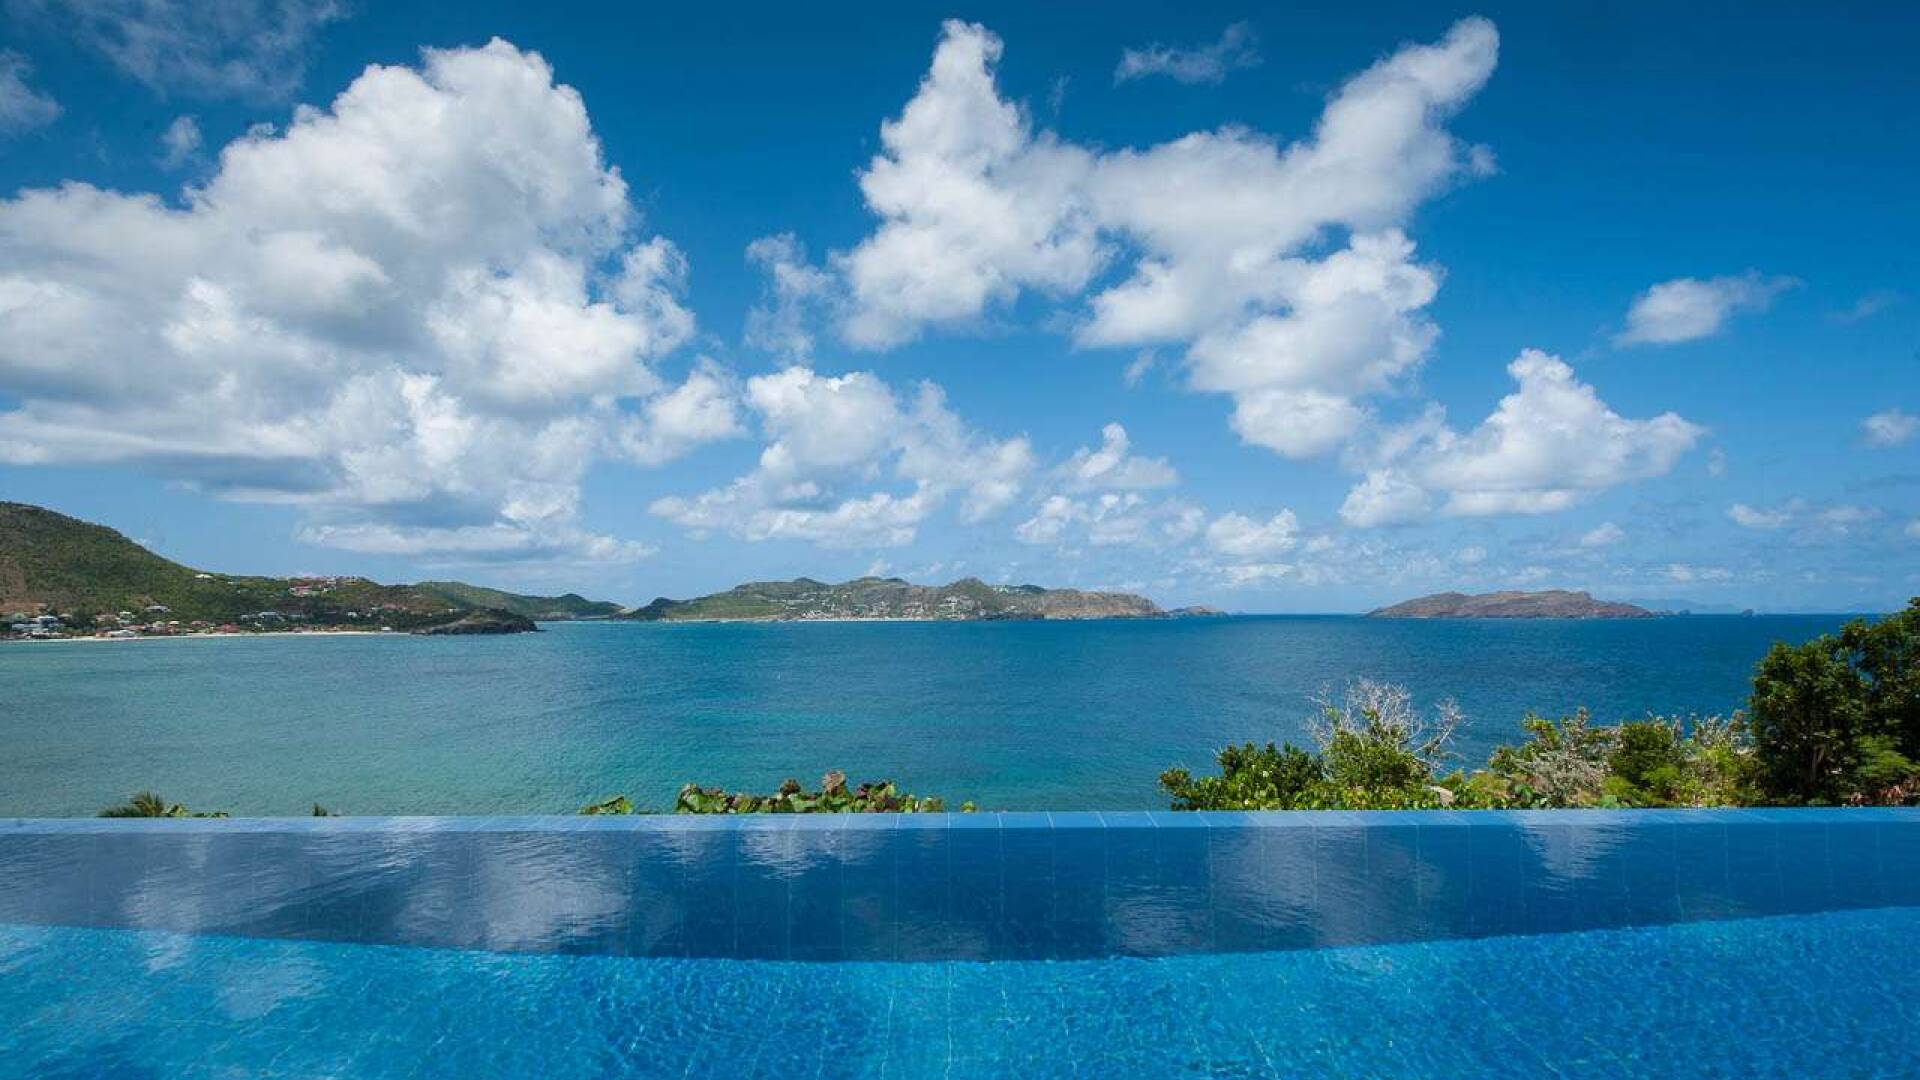 The view from WV VPM, Pointe Milou, St. Barthelemy